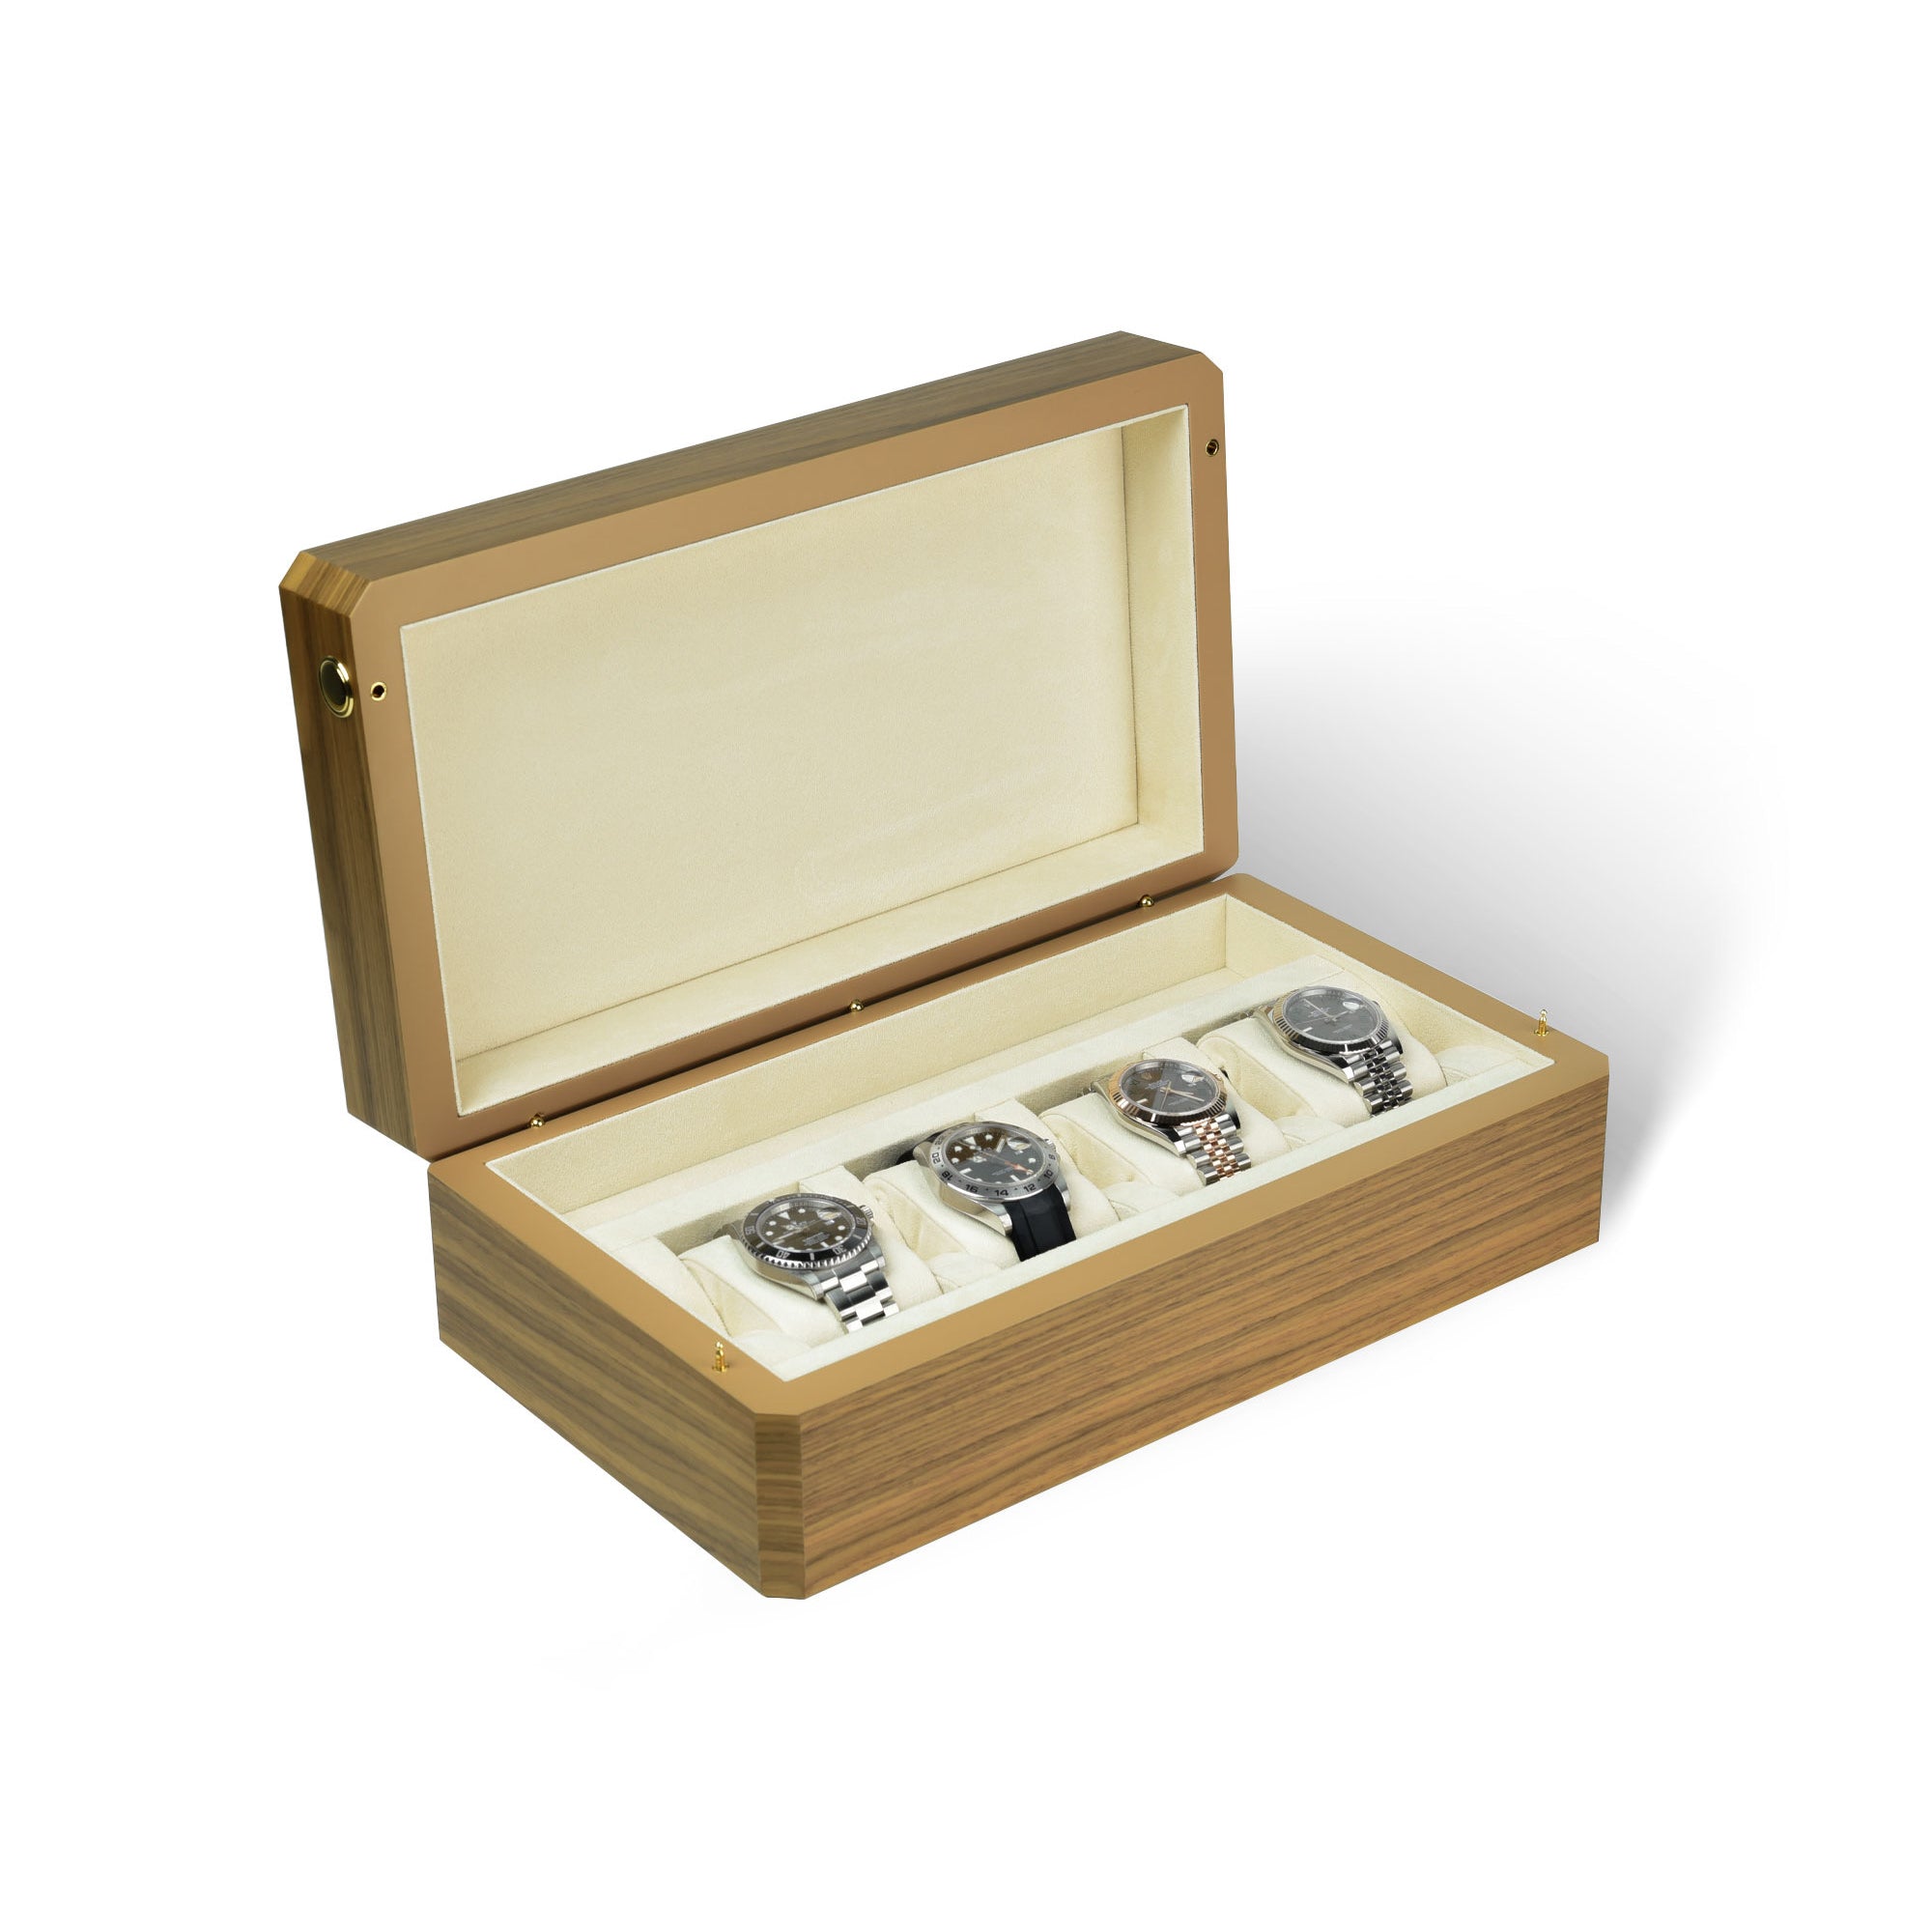 Everest Bands The Everest Watch Box for 4 Watches